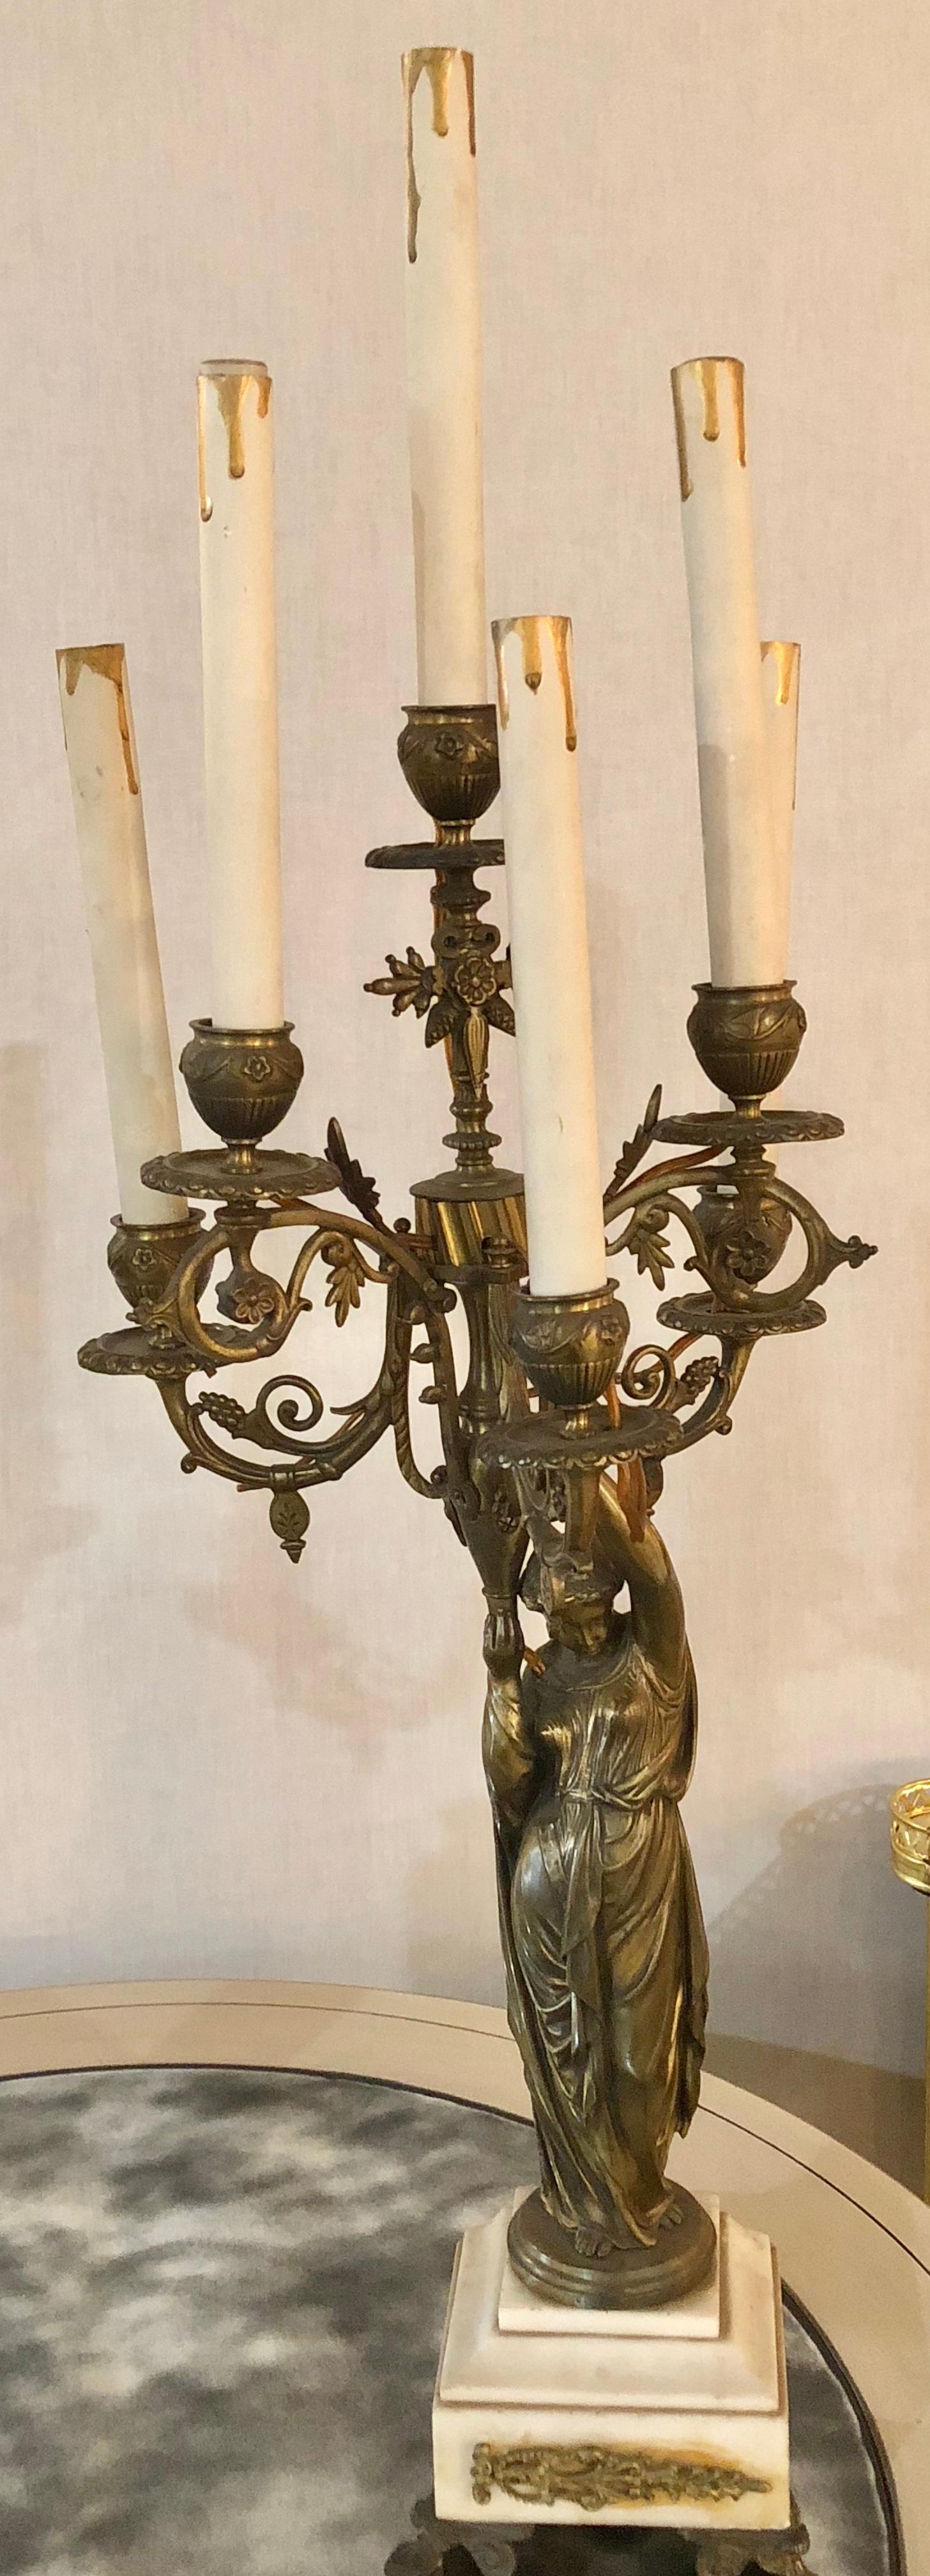 A pair of 19th century neoclassical style figural bronze candelabras, each having a full bodied woman supporting a five arm candelabrum. The whole on a marble and bronze base.